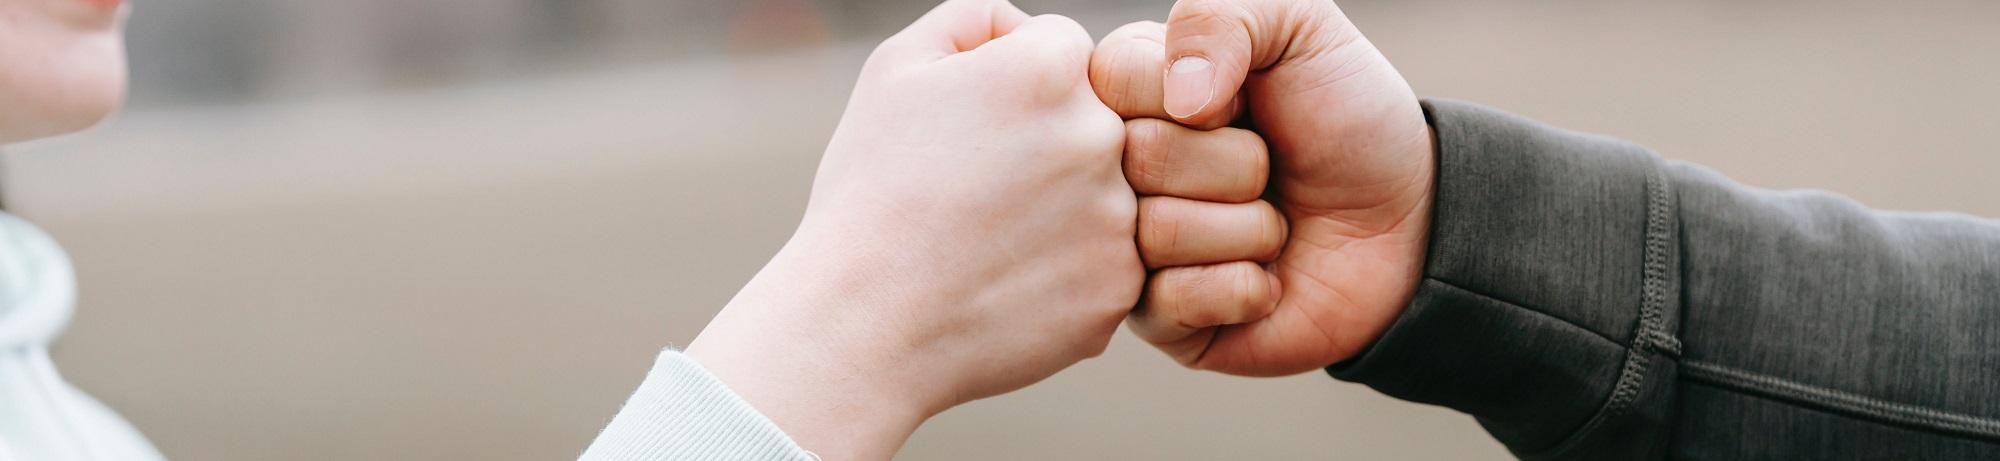 two hands in a fist bump 